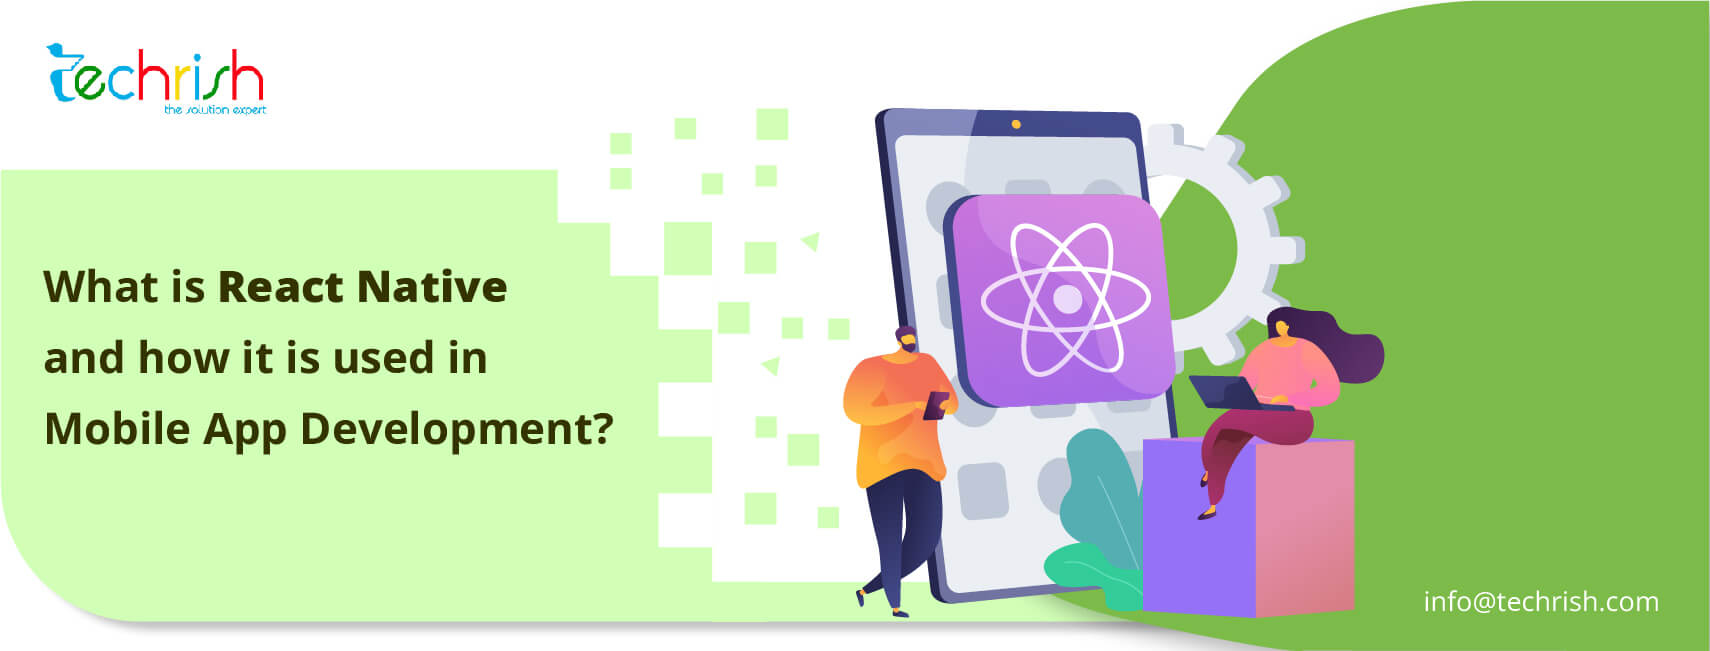 Why Use React Native for Mobile App Development